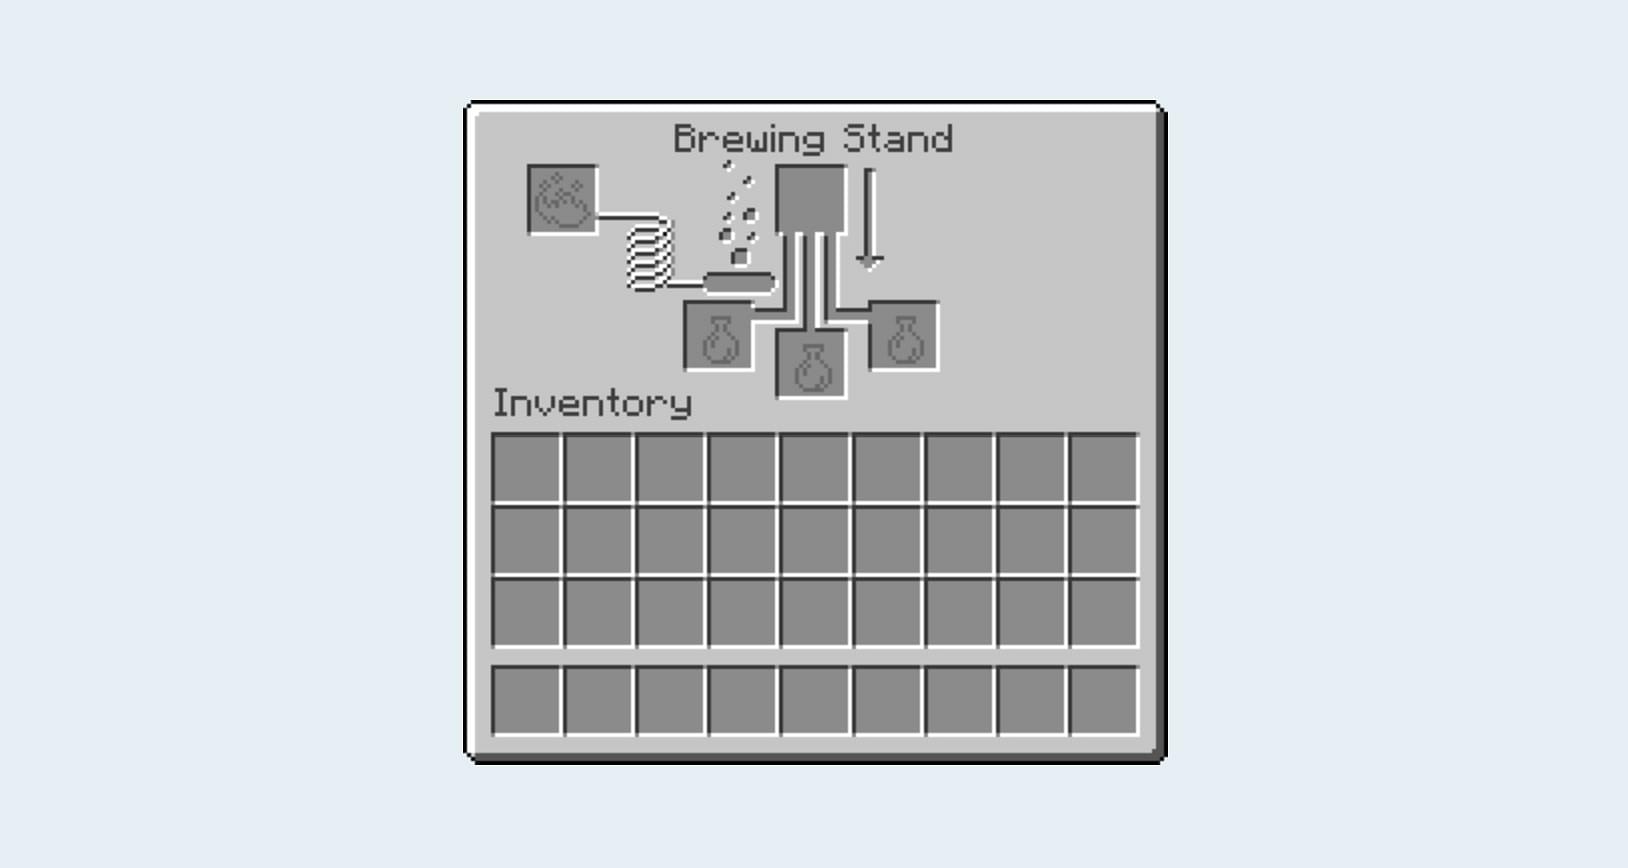 How to Make a Brewing Stand in Minecraft: What are the Uses of This Stand